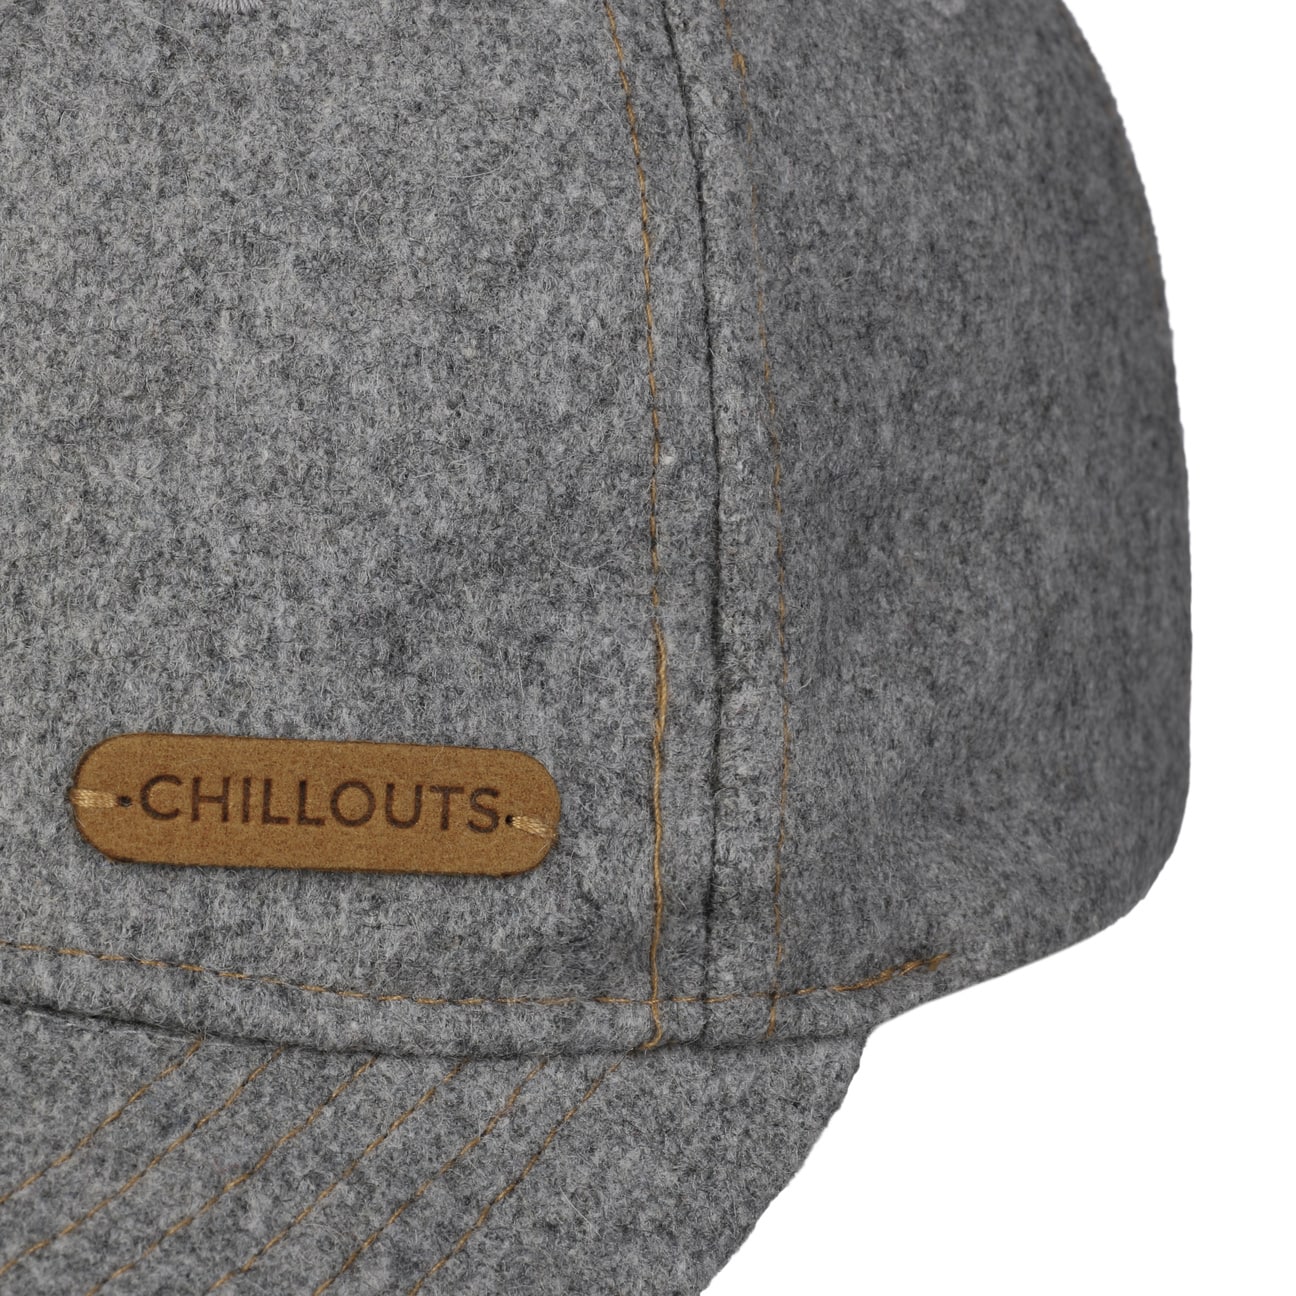 CHF - Chillouts Matero 33,95 Cap by